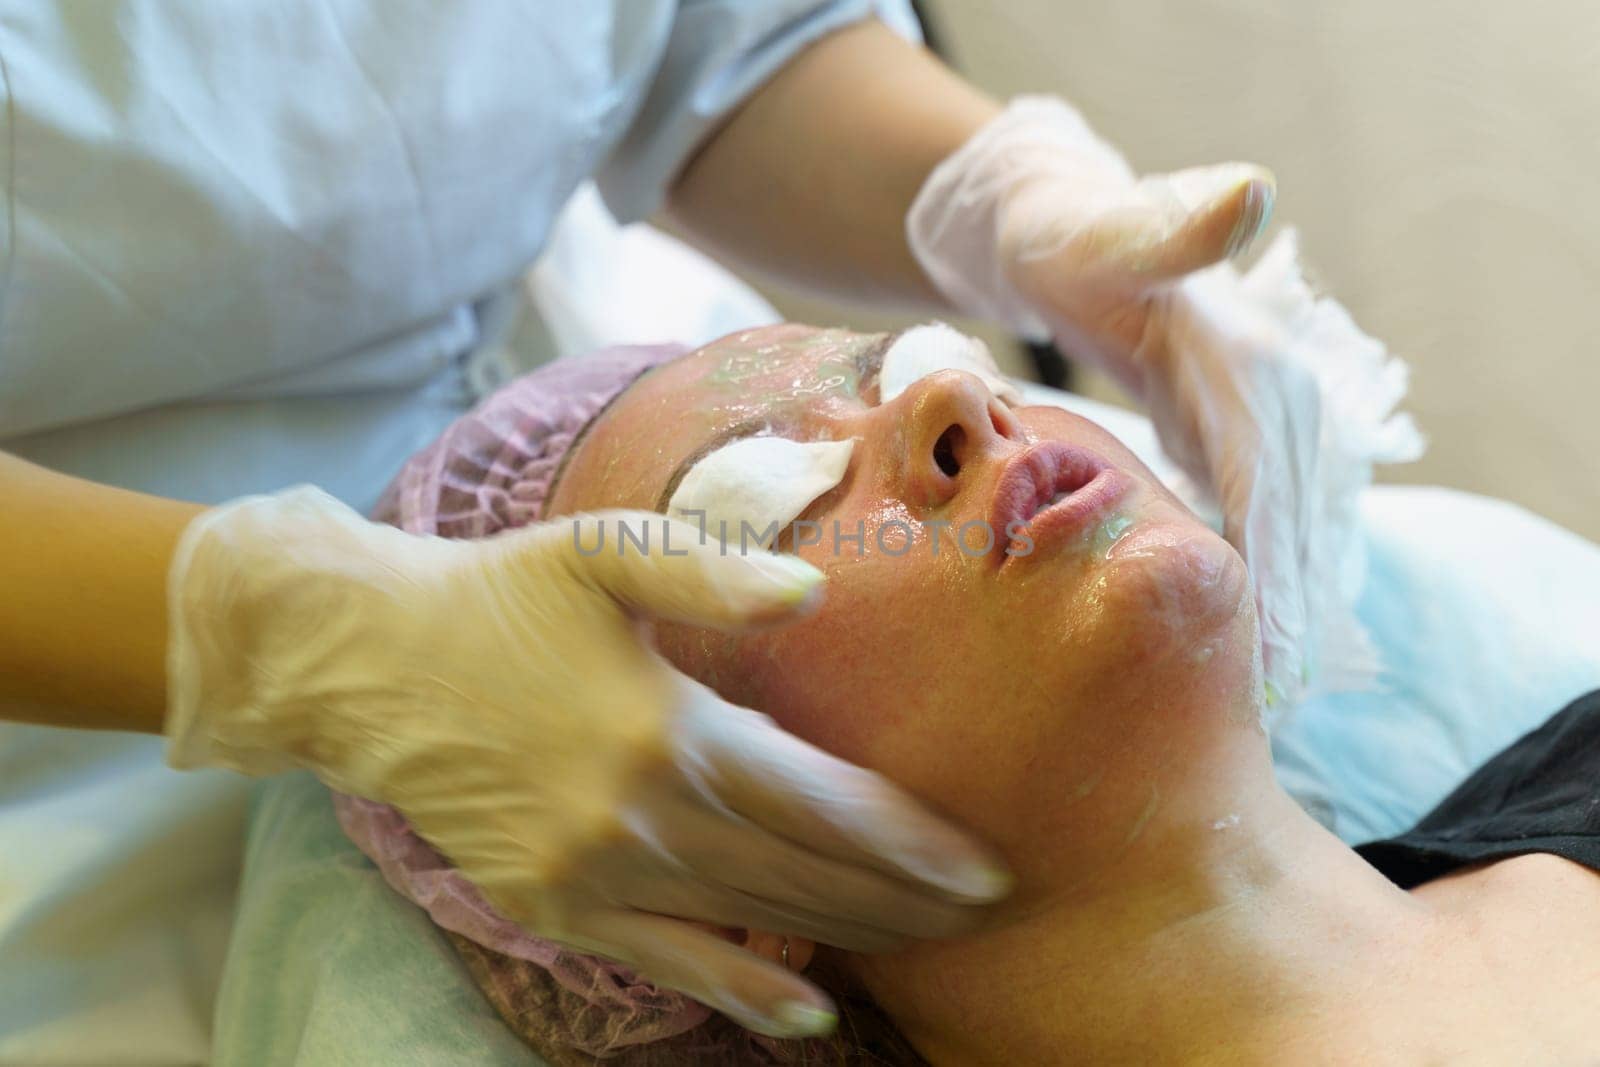 A woman getting a facial mask applied to her face at a spa or skincare clinic.